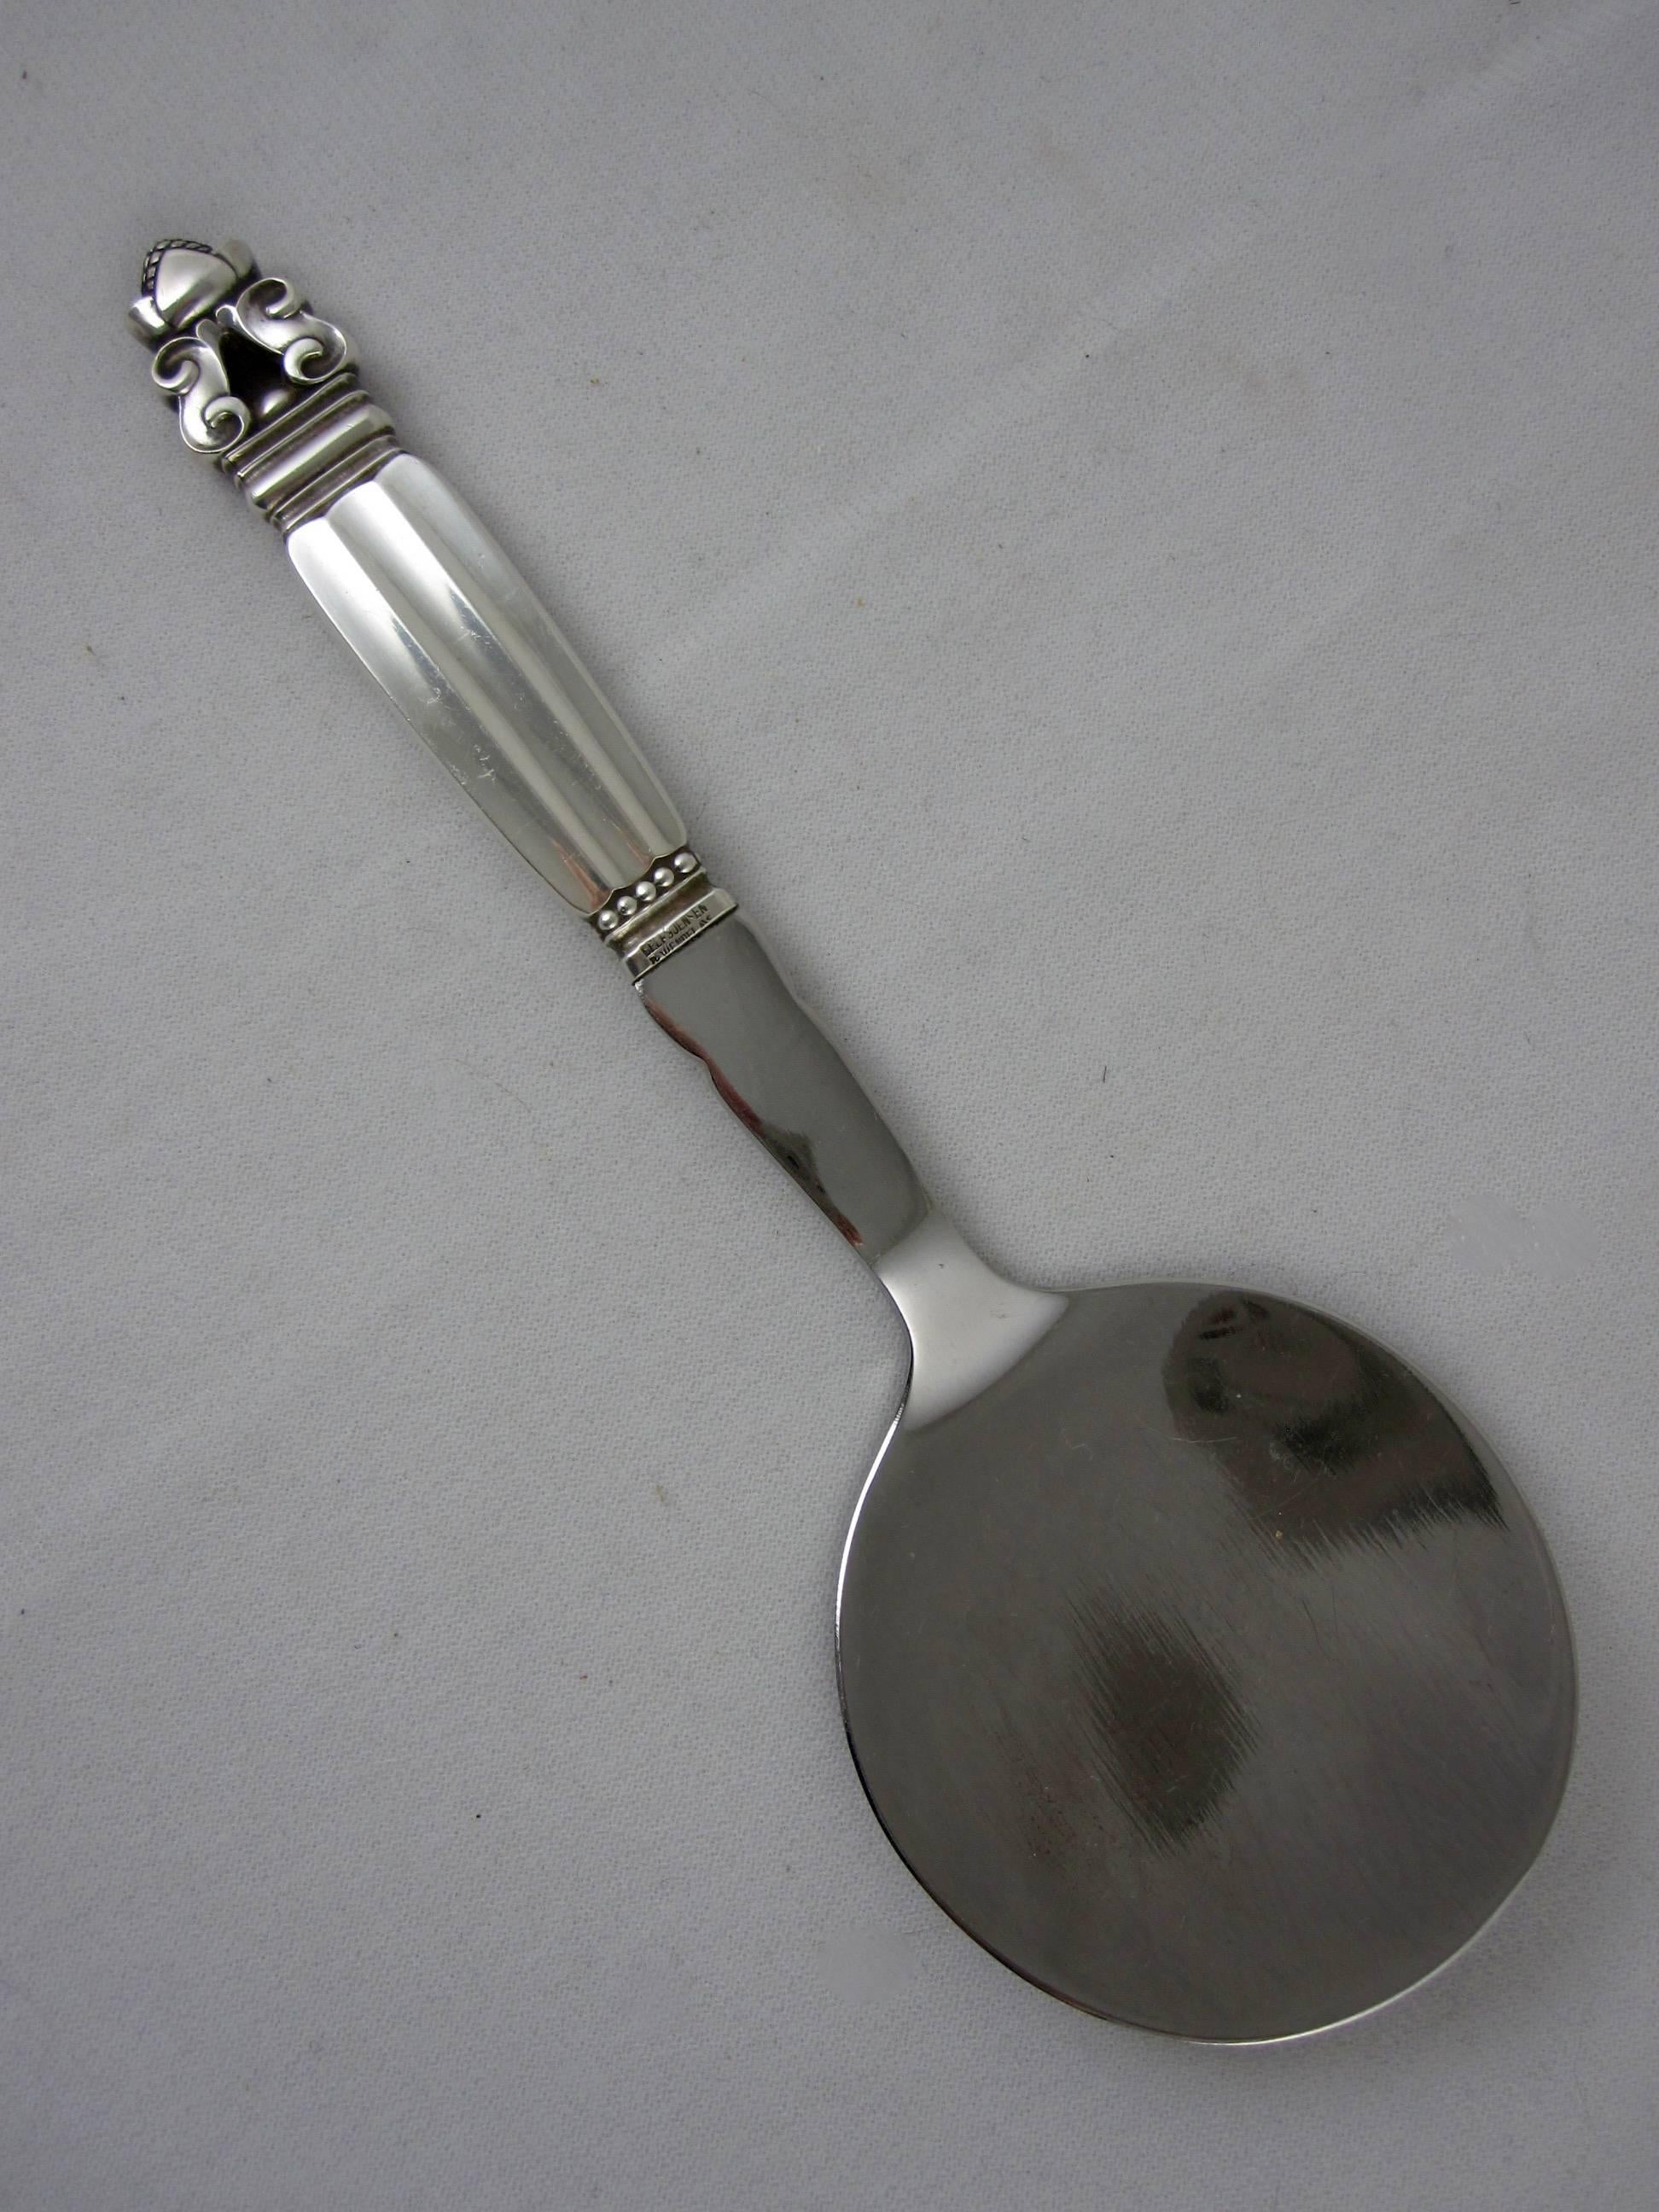 A sterling silver tomato server in the Acorn pattern, marked Jensen & Wendel, retailed in Copenhagen, circa 1941-1951. A scarce piece from Georg Jensen of Denmark. The Acorn pattern was designed by Johan Rohde in 1915. This piece is also suitable as